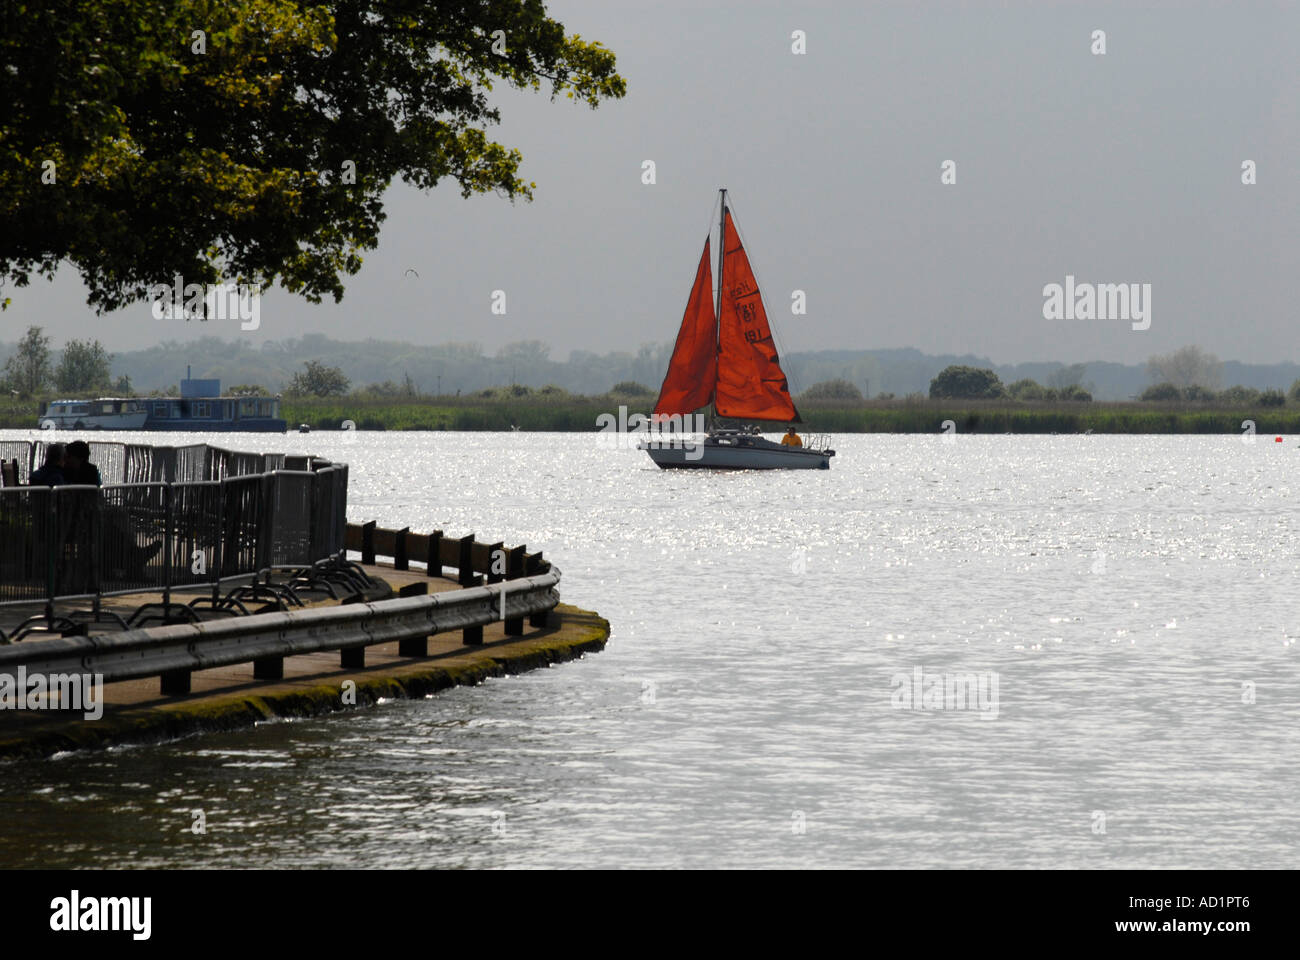 A sailboat in evening sunlight on Oulton Broad Suffolk UK Stock Photo